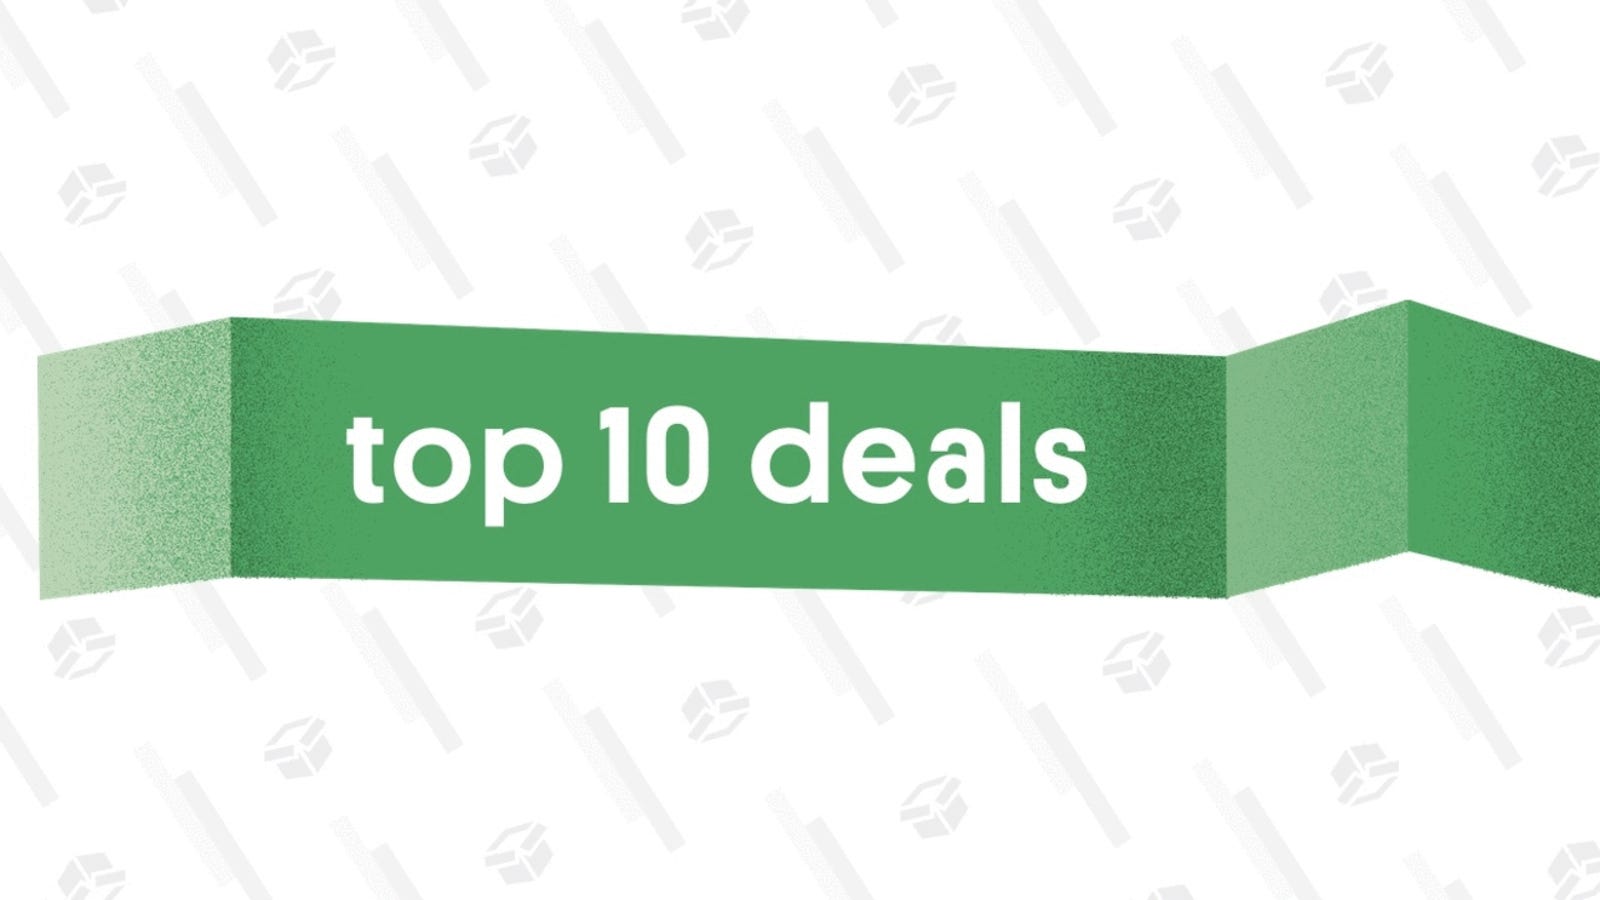 photo of The 10 Best Deals of May 20, 2019 image